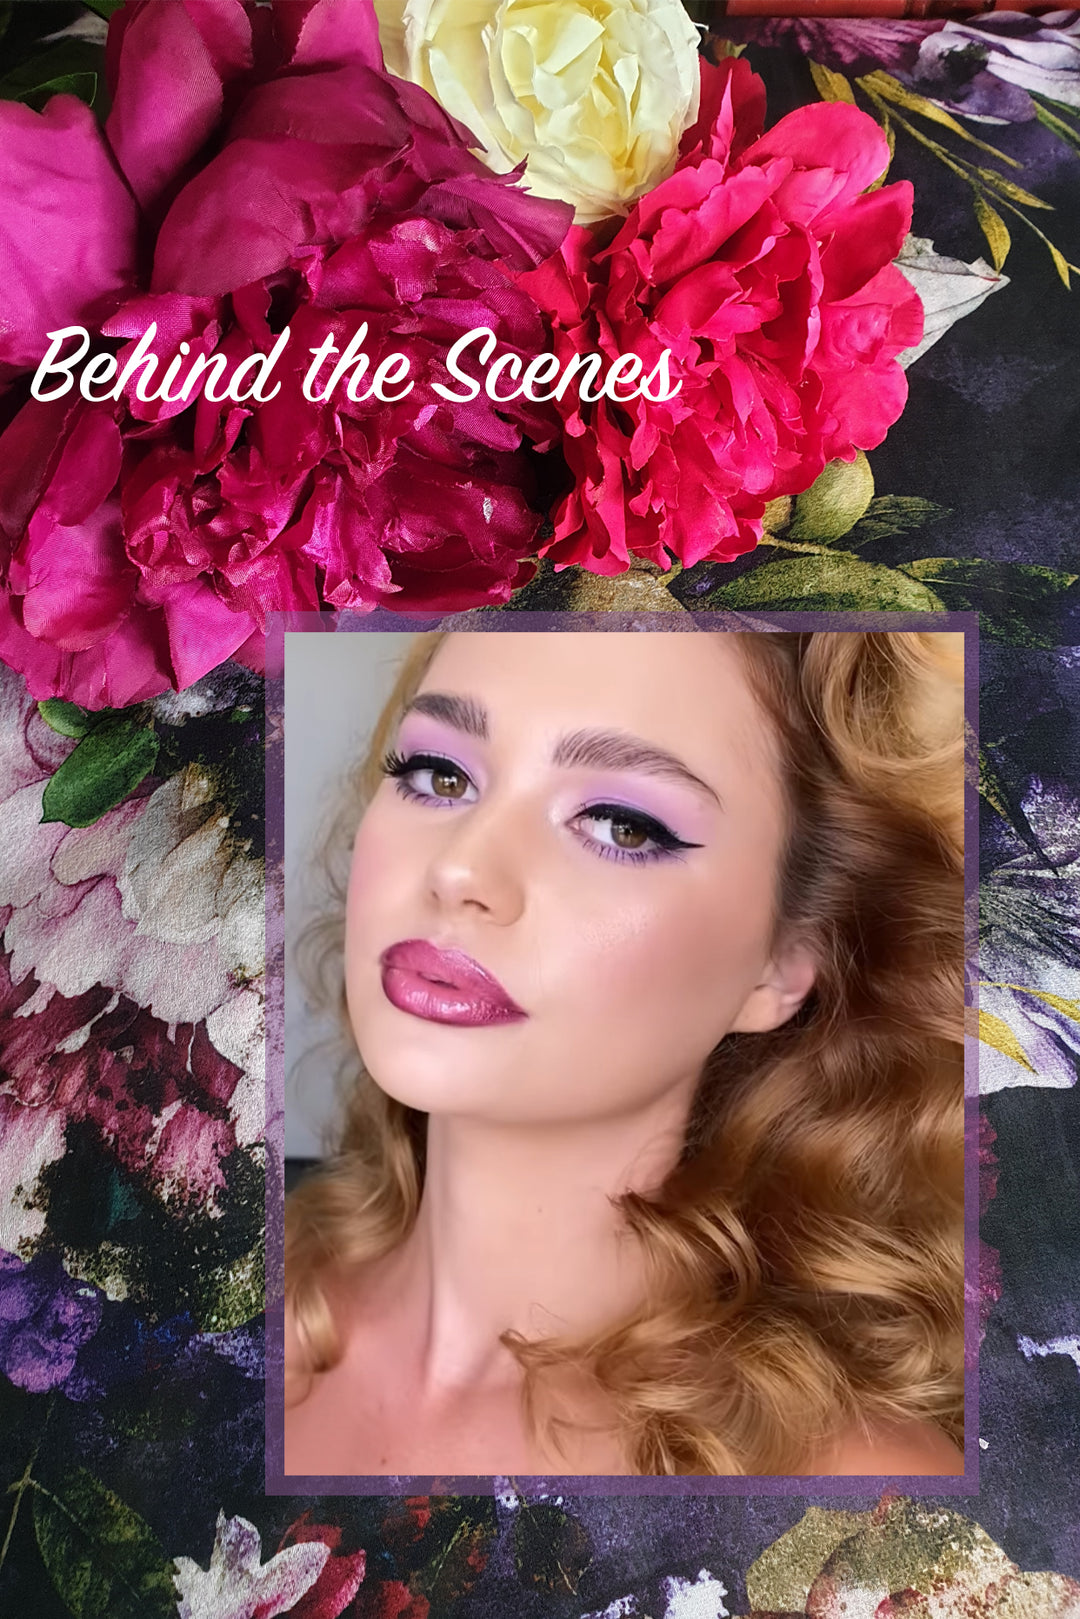 Behind the scenes featuring 'La Fleur Nocturne' Hair and Make-Up